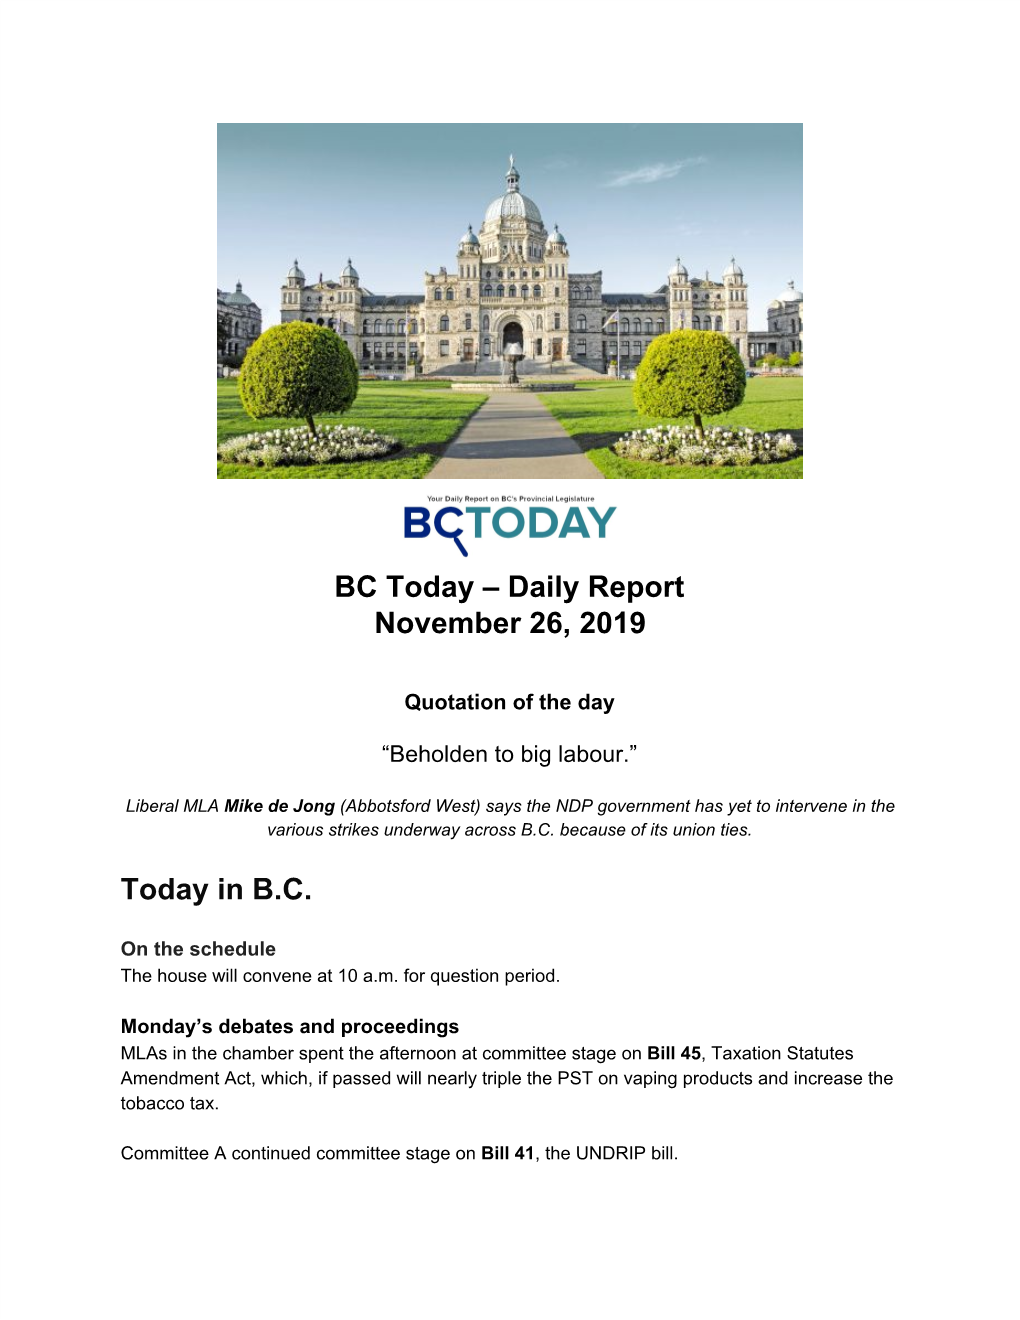 BC Today – Daily Report November 26, 2019 Today